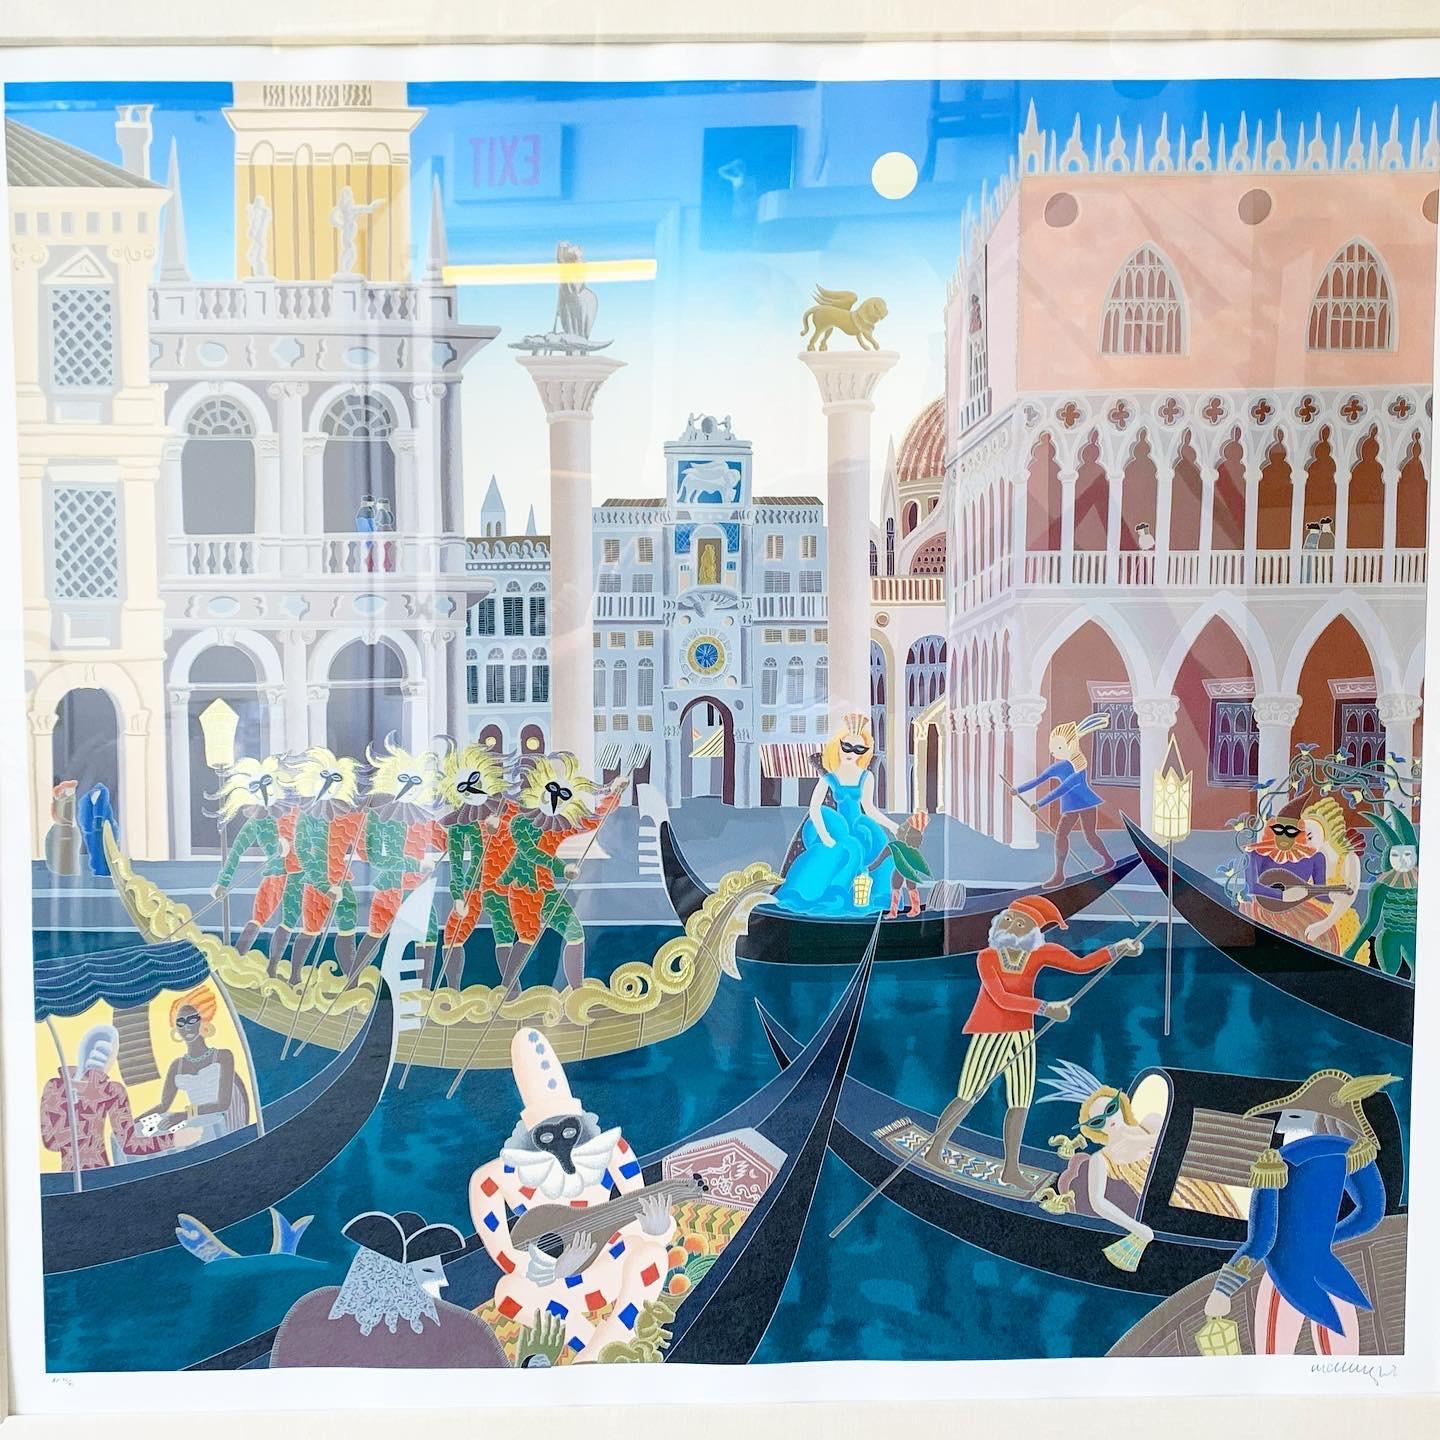 Renaissance Revival Venetian Suite of 2, Carnival in Venice 'Venetian Tale', 1988, Framed and Signed